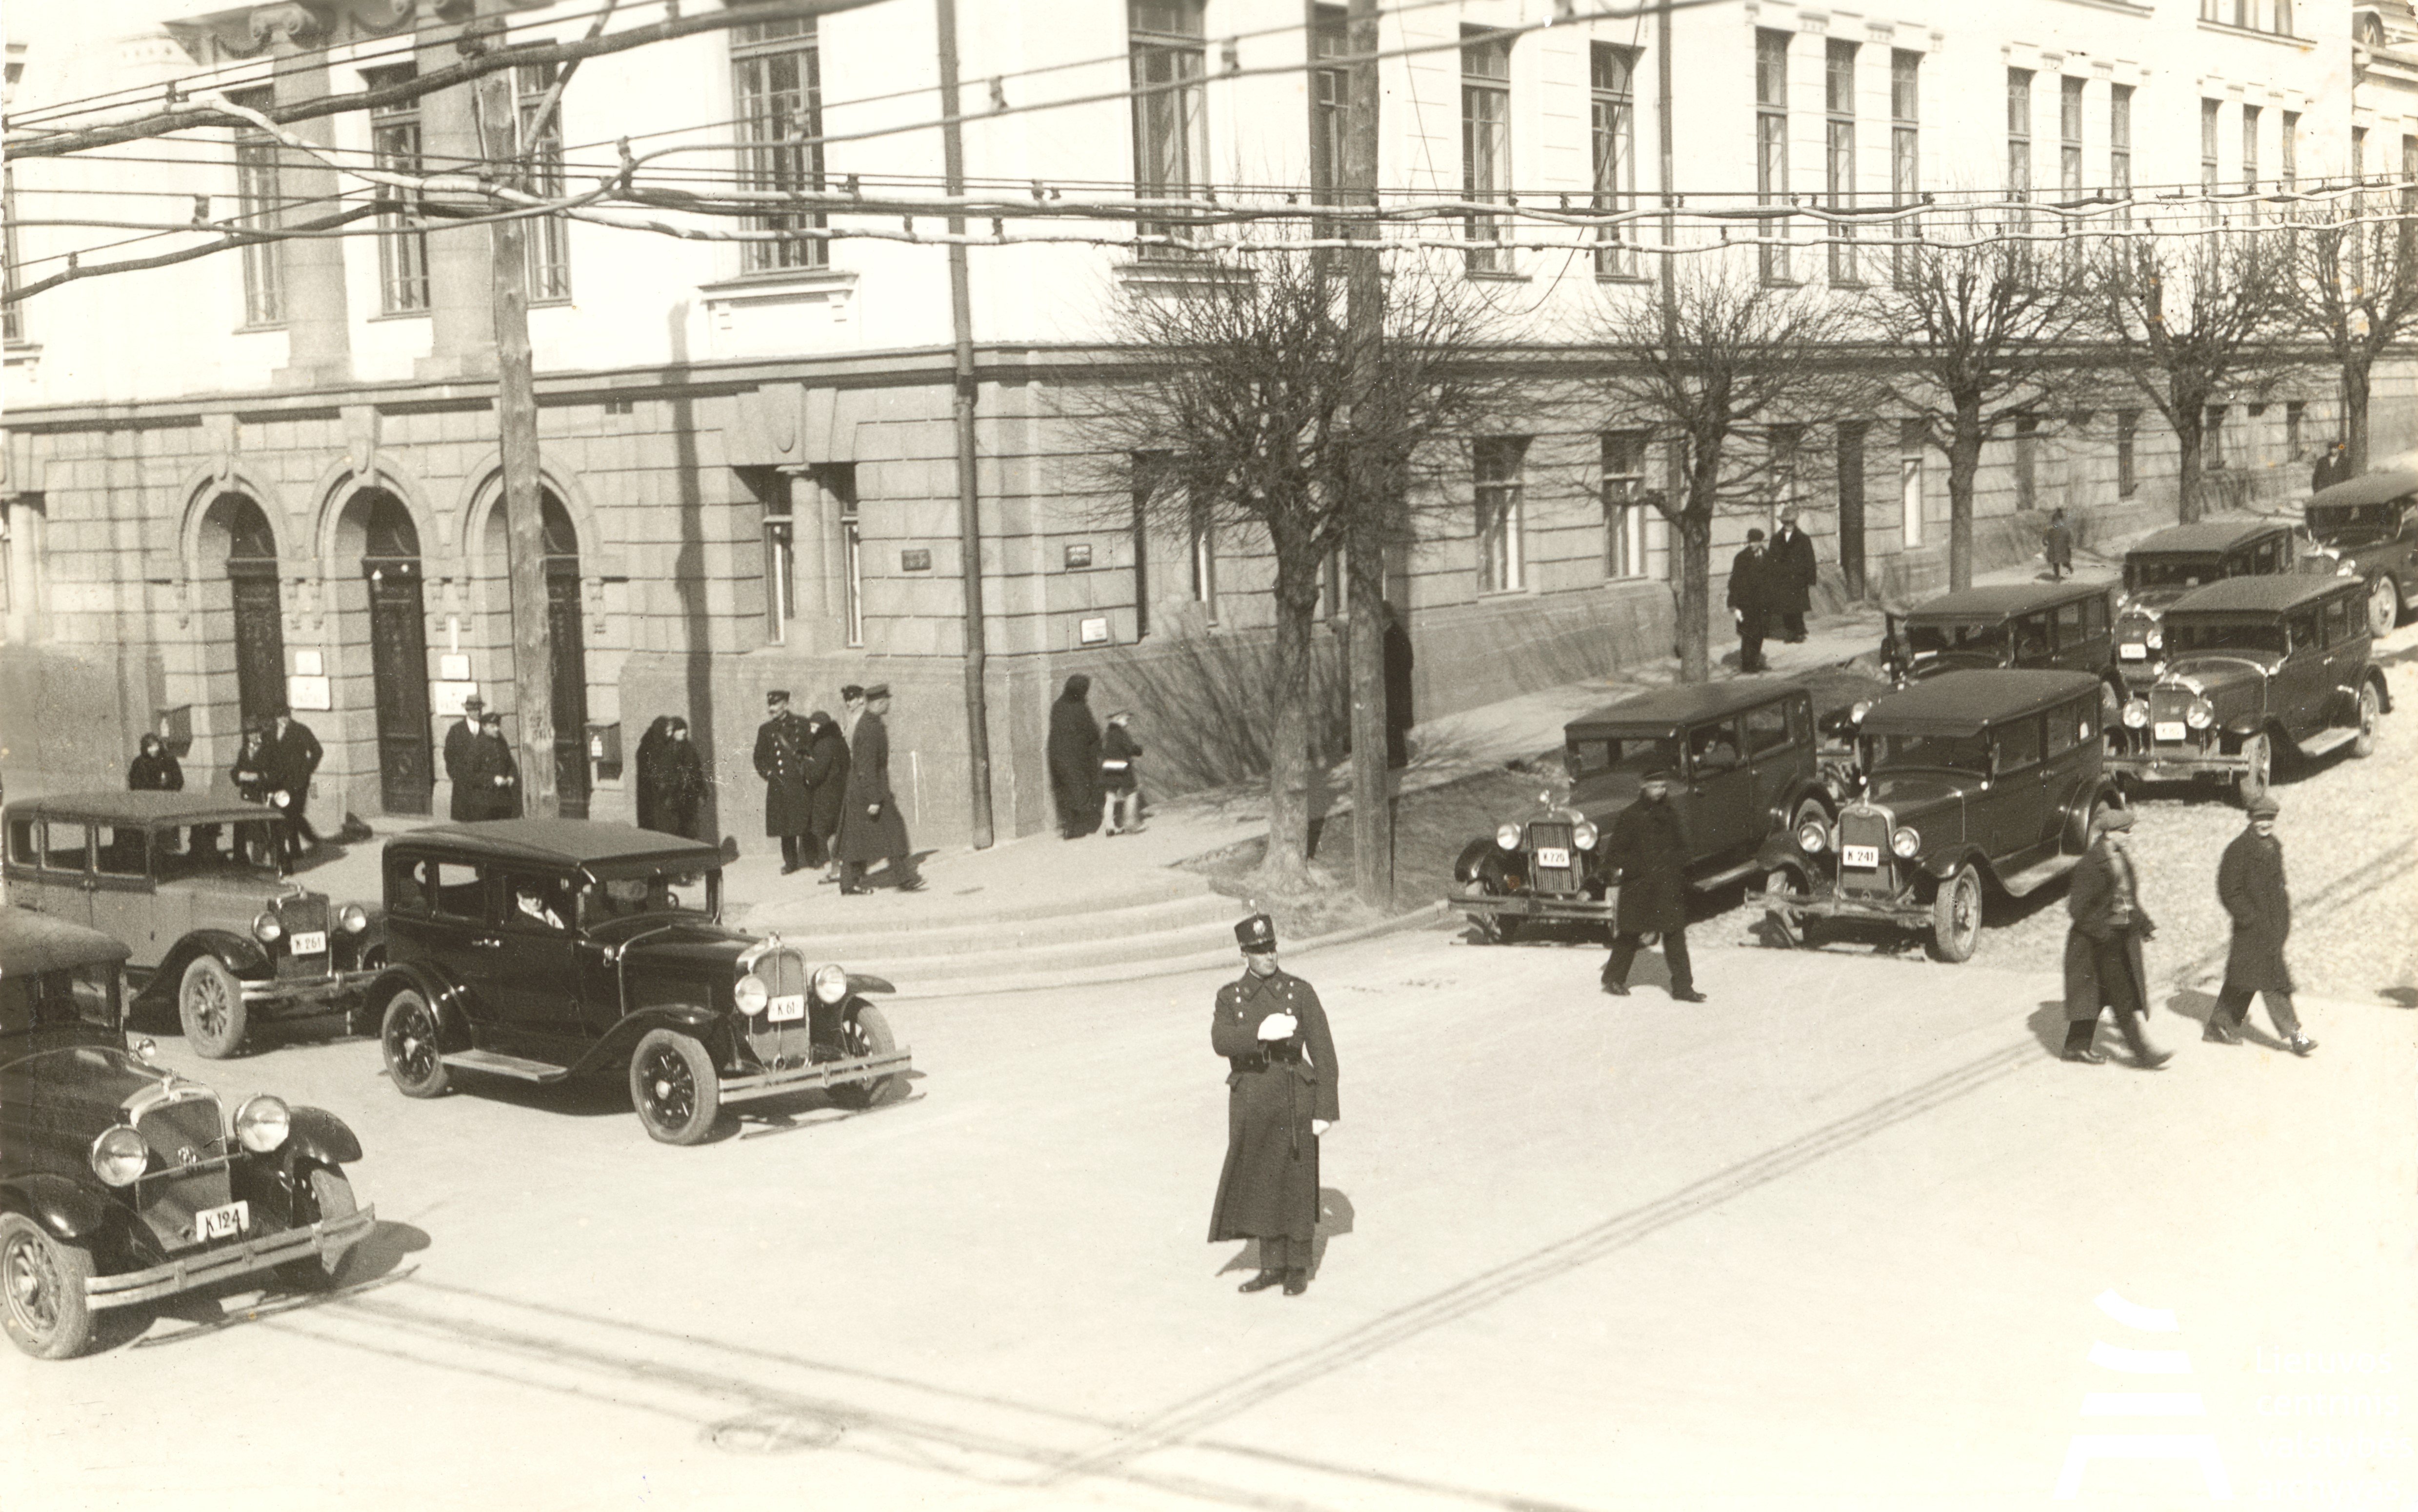 Lithuanian Central State Archives, A police officer regulating traffic on the crossroad of Donelaitis and Maironis street next to Lithuanian ministry of Finance. Kaunas, Lithuania, 1930s.